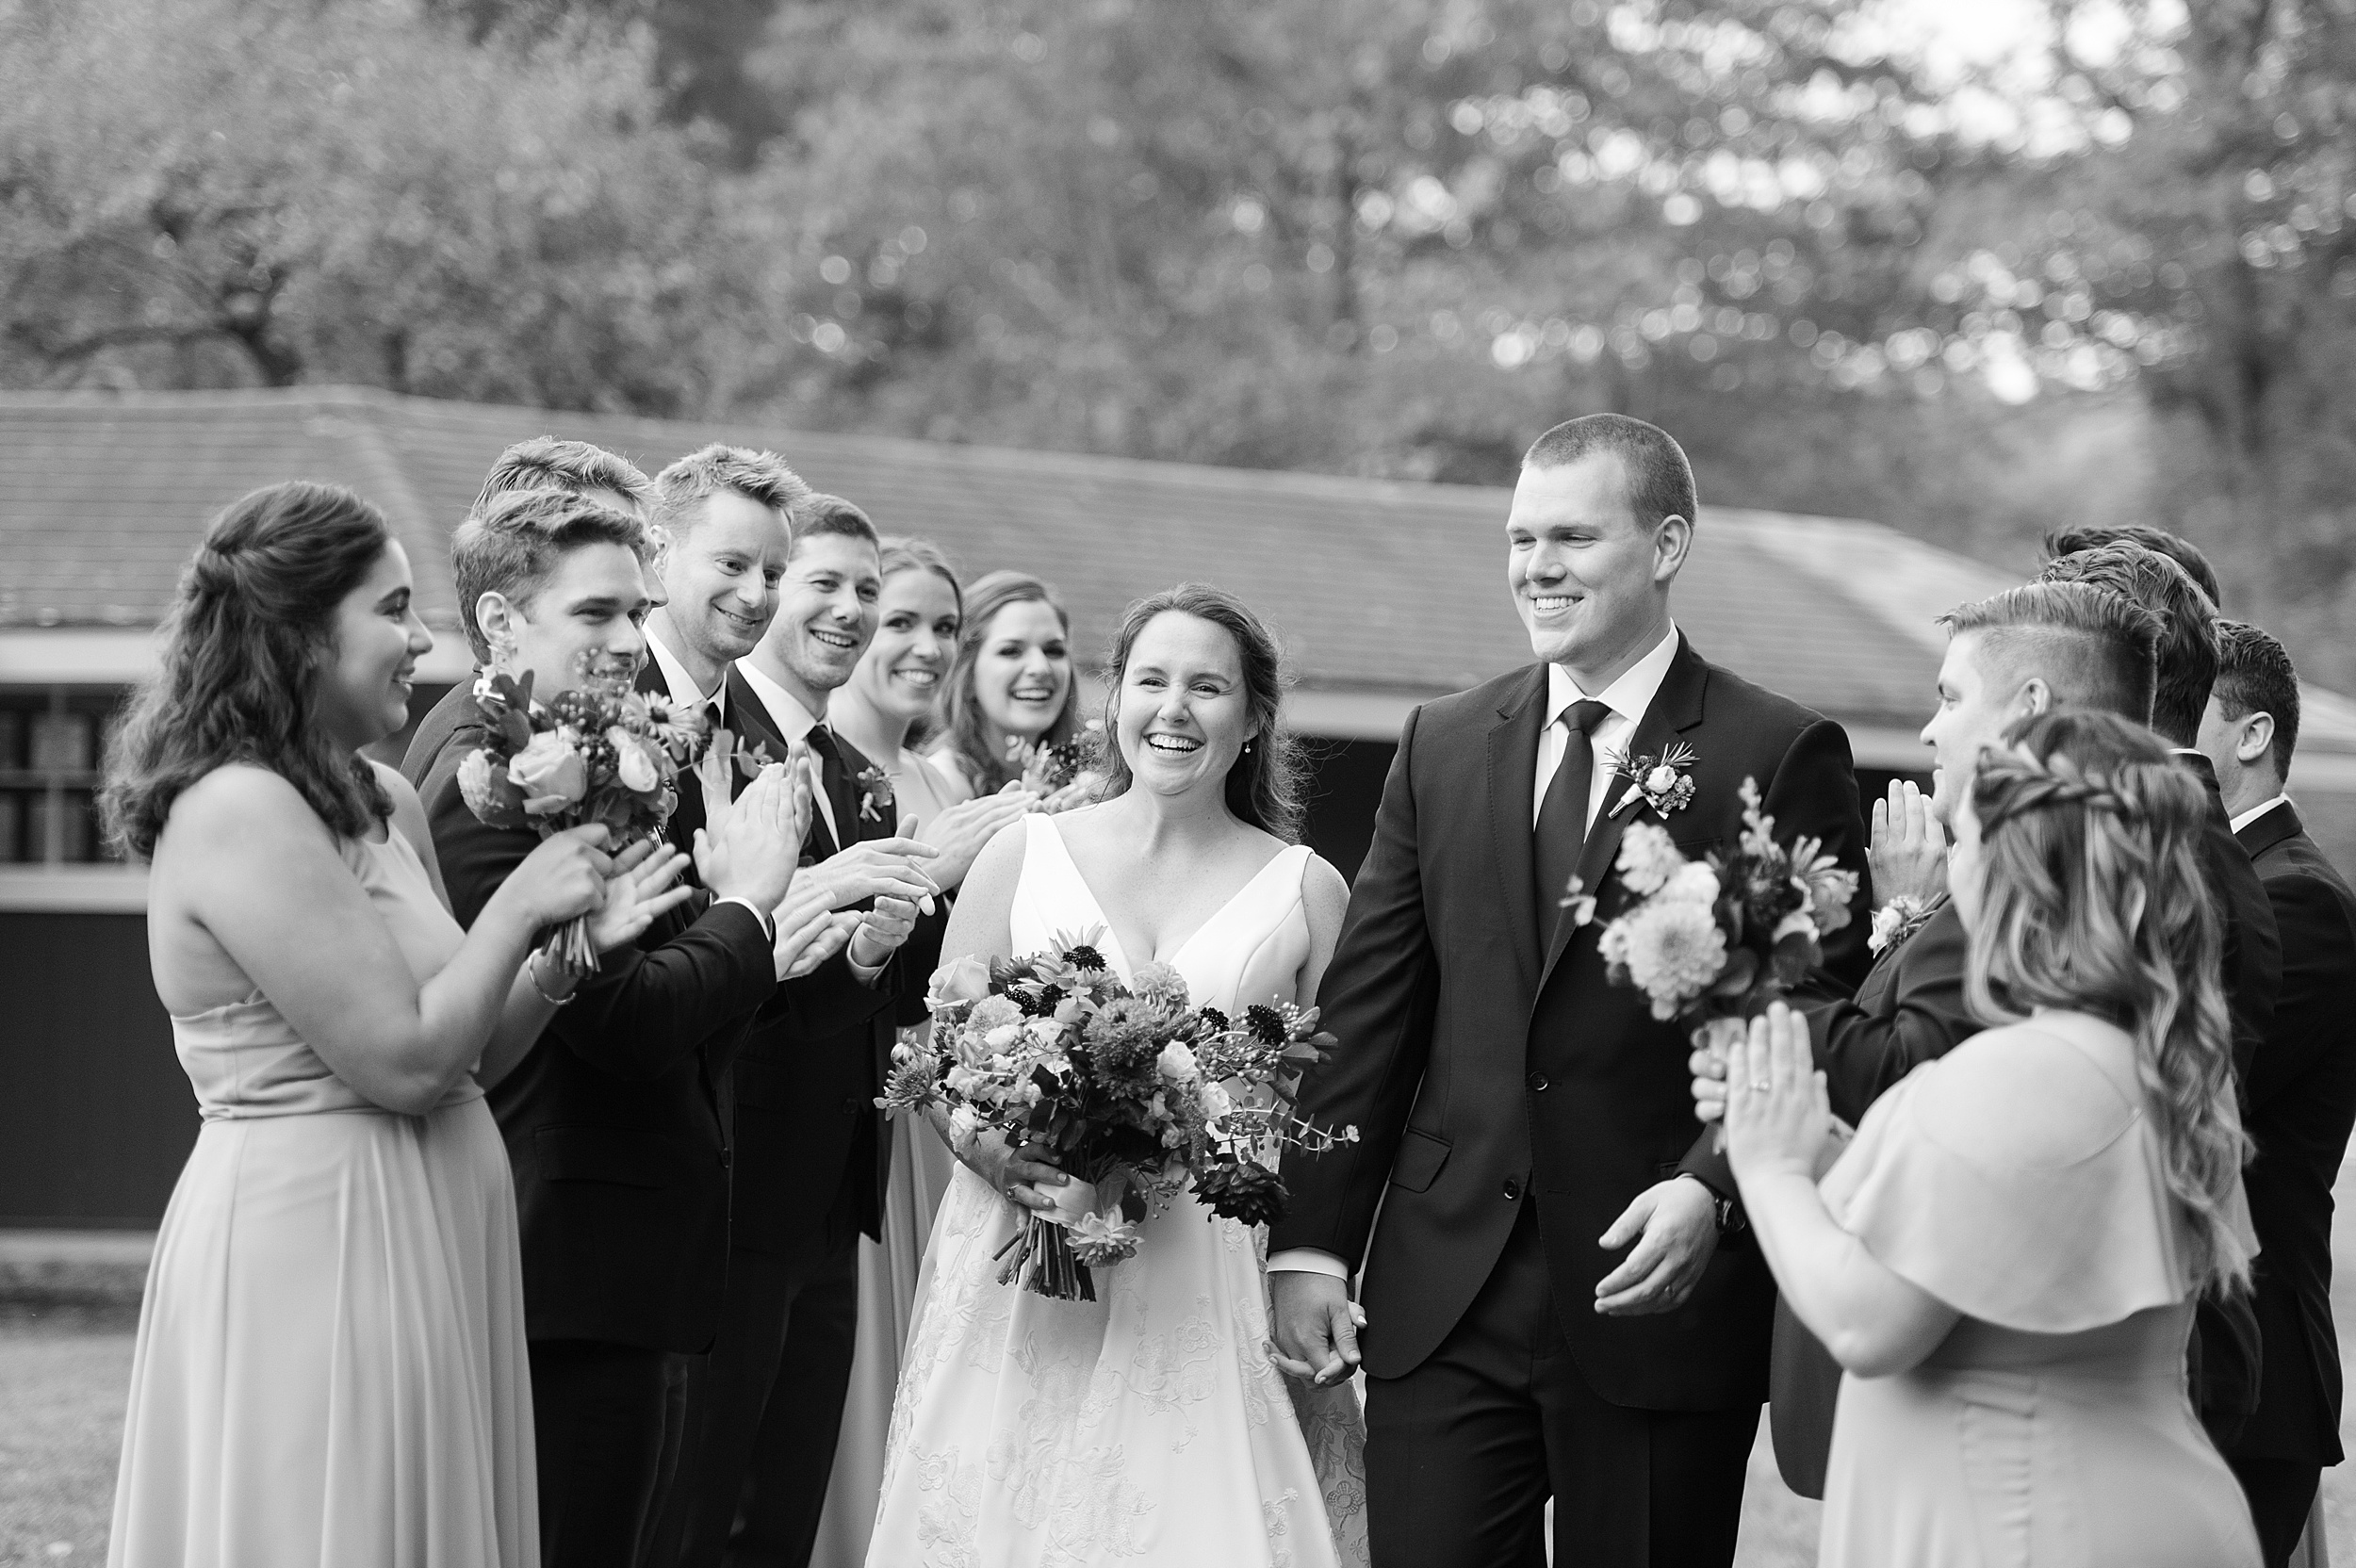 newlyweds with wedding party for portraits at coastal Maine wedding in black and white